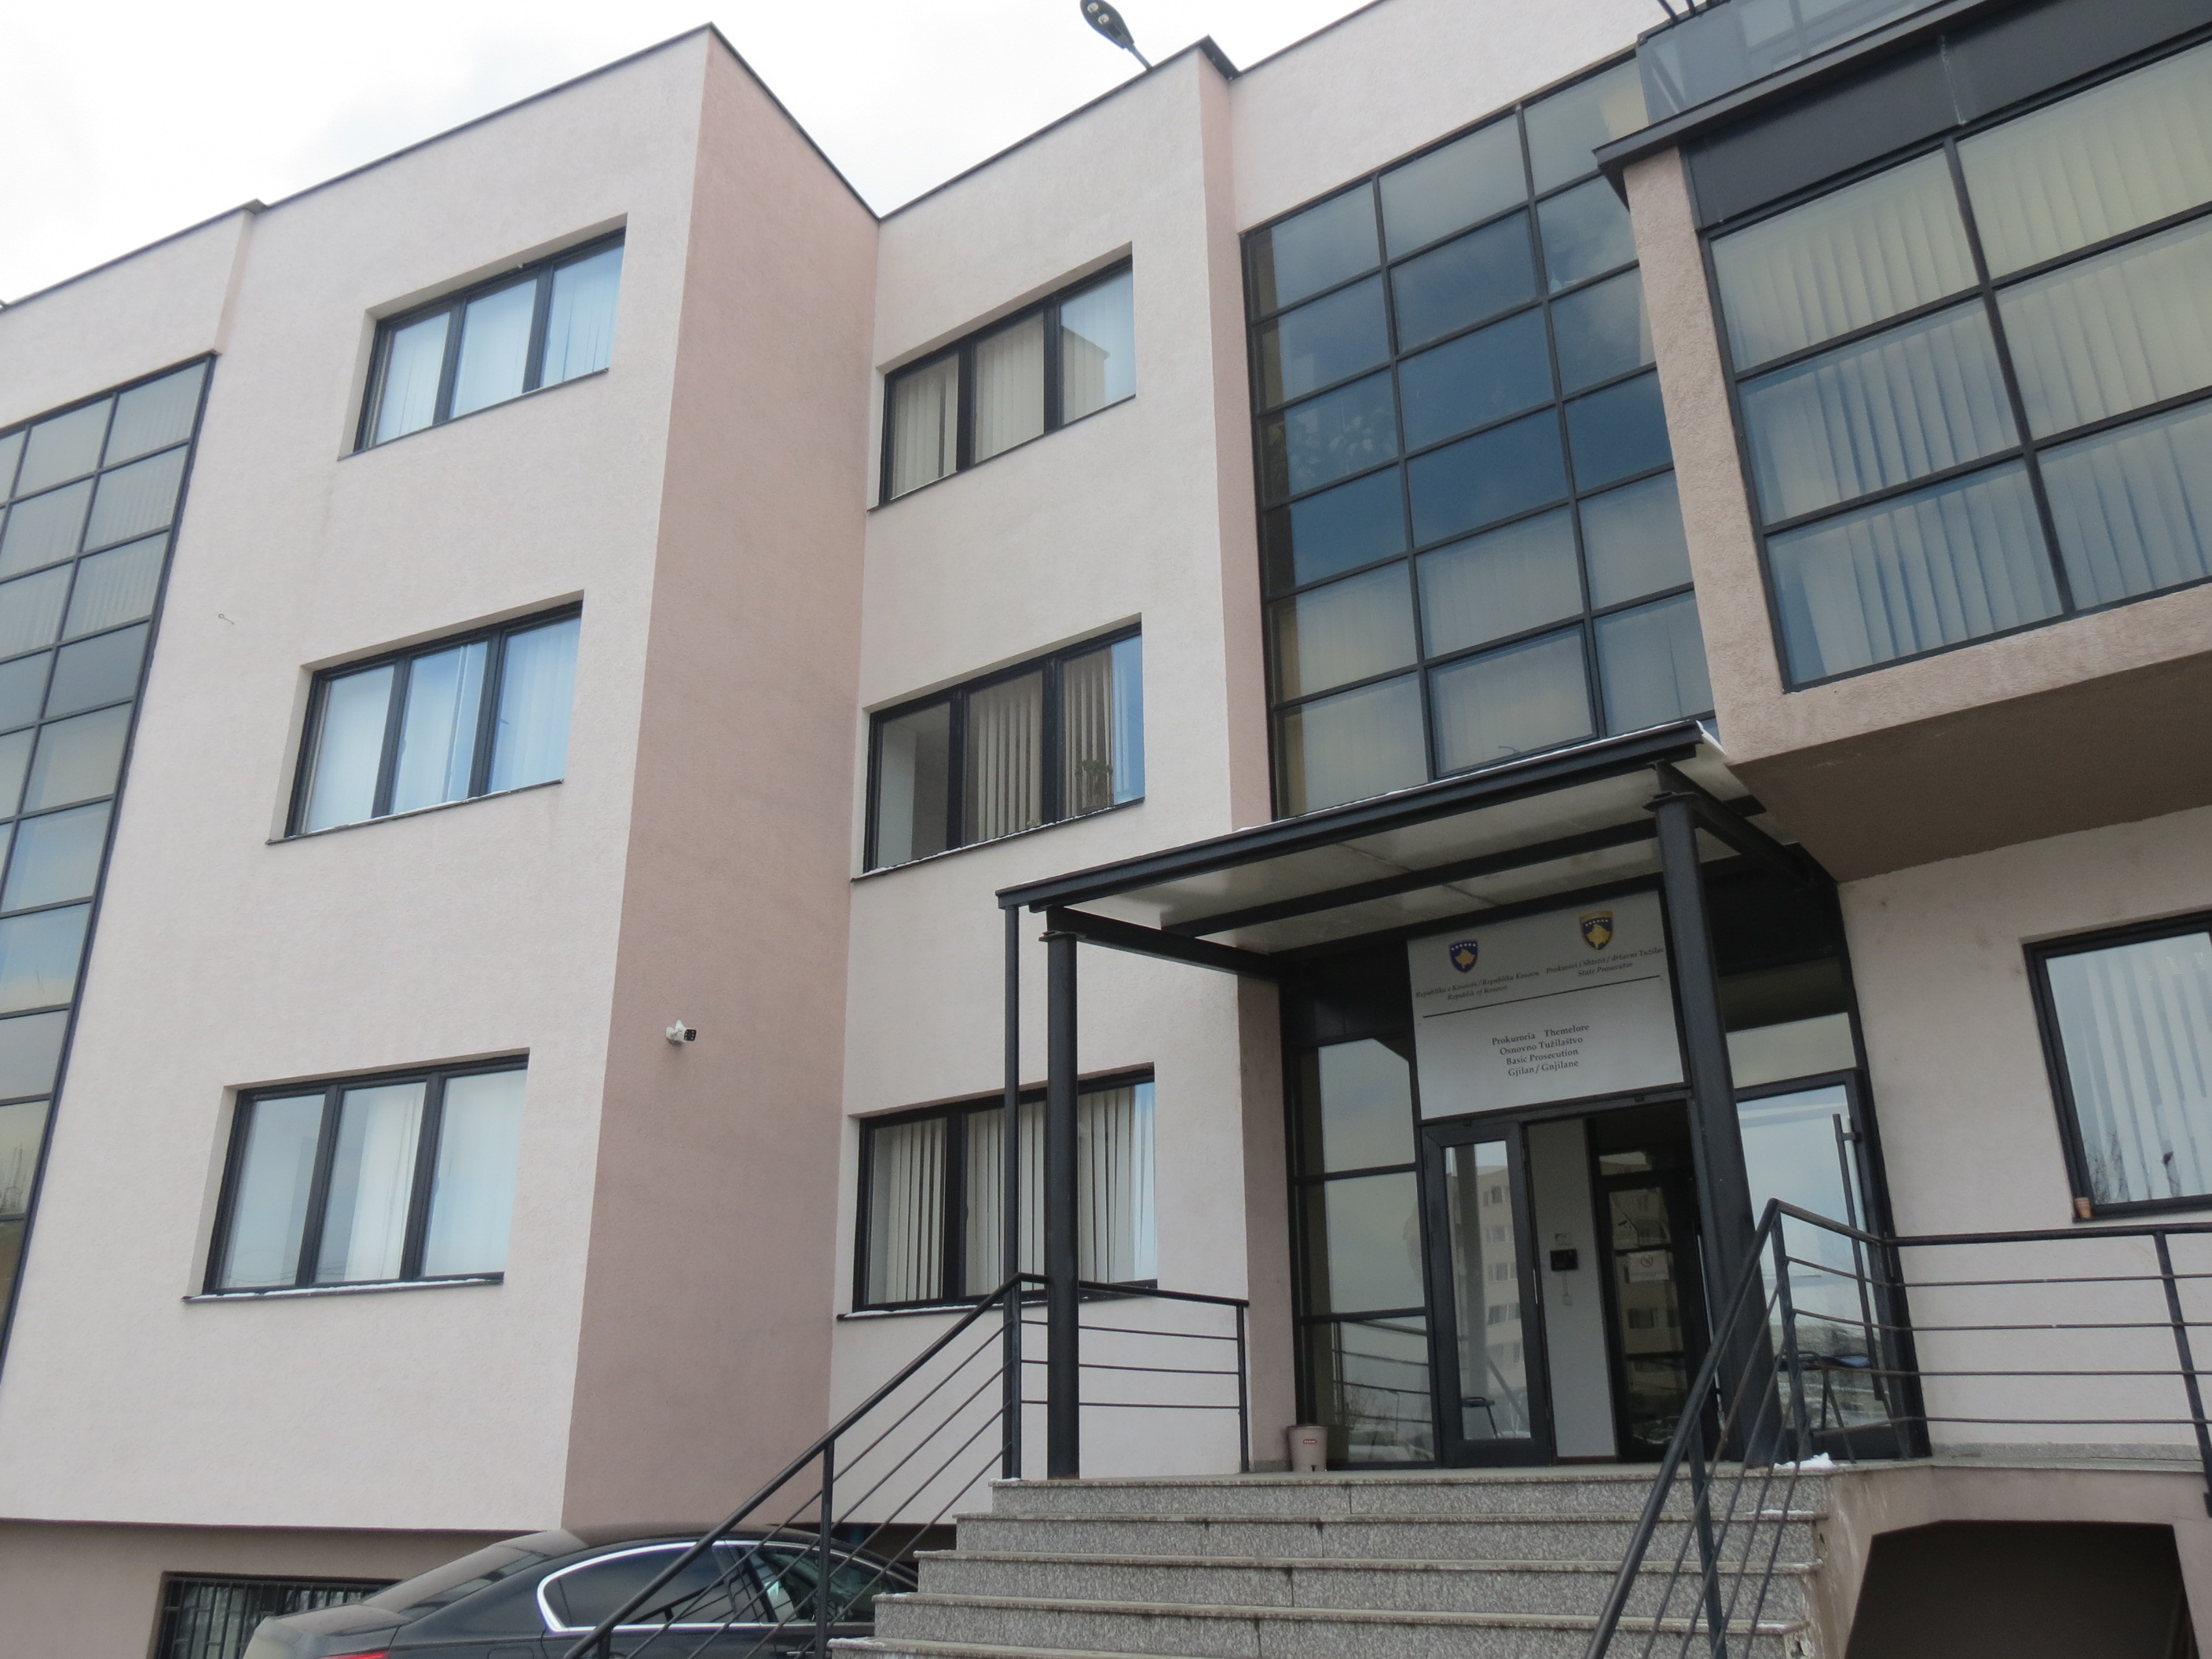 The Prosecution in Gjilan filed 6 indictments against fake veterans